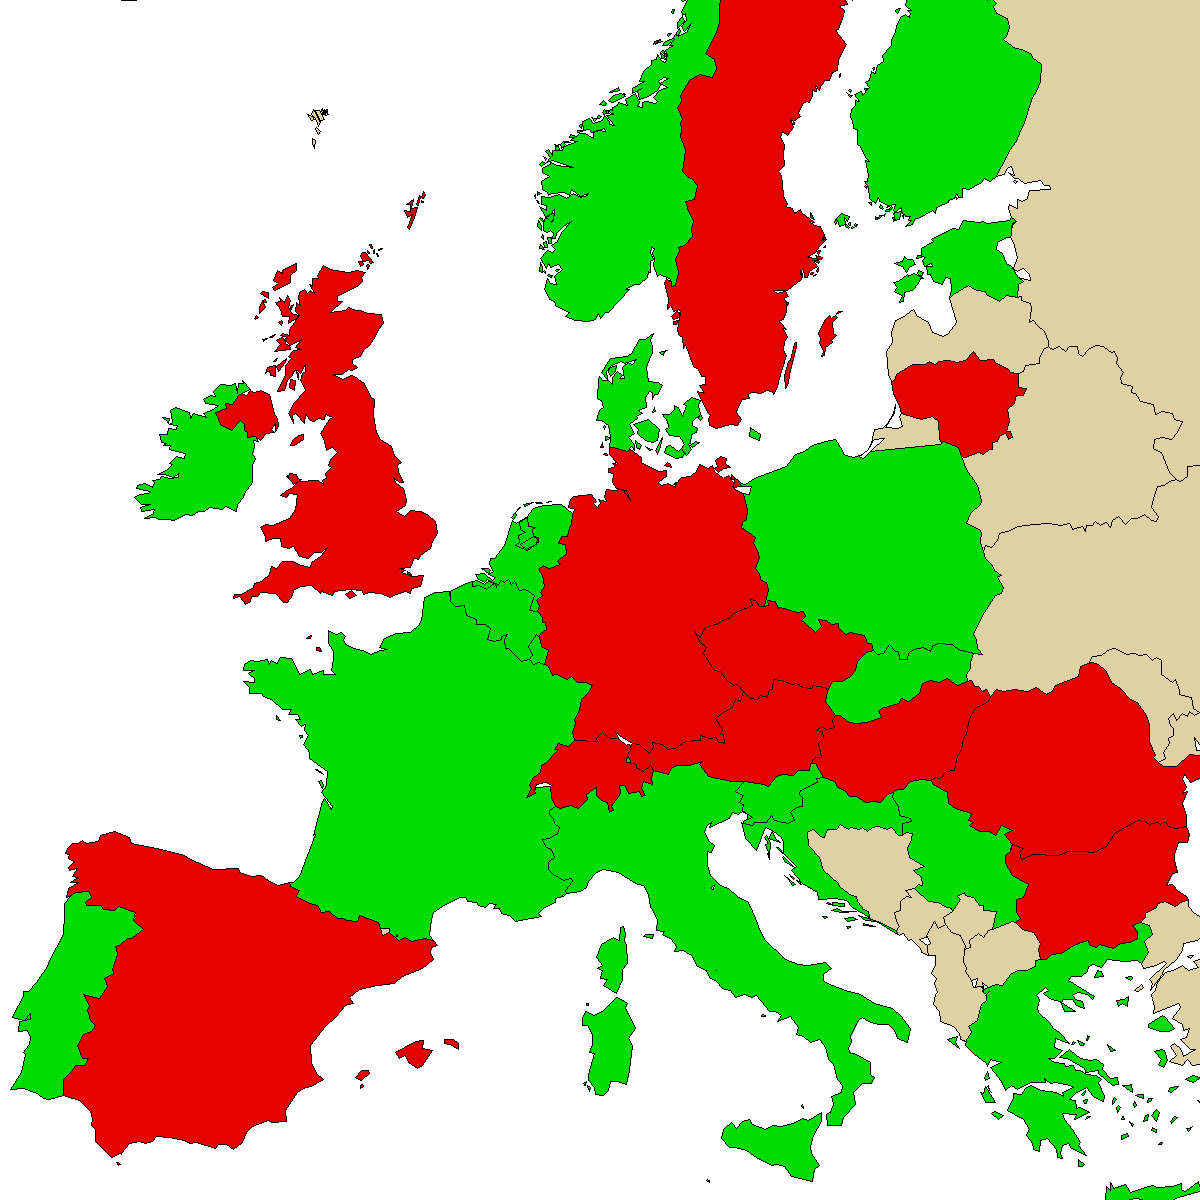 legal info map for our product O-PCE, green are countries where we found no ban, red with ban, grey is unknown